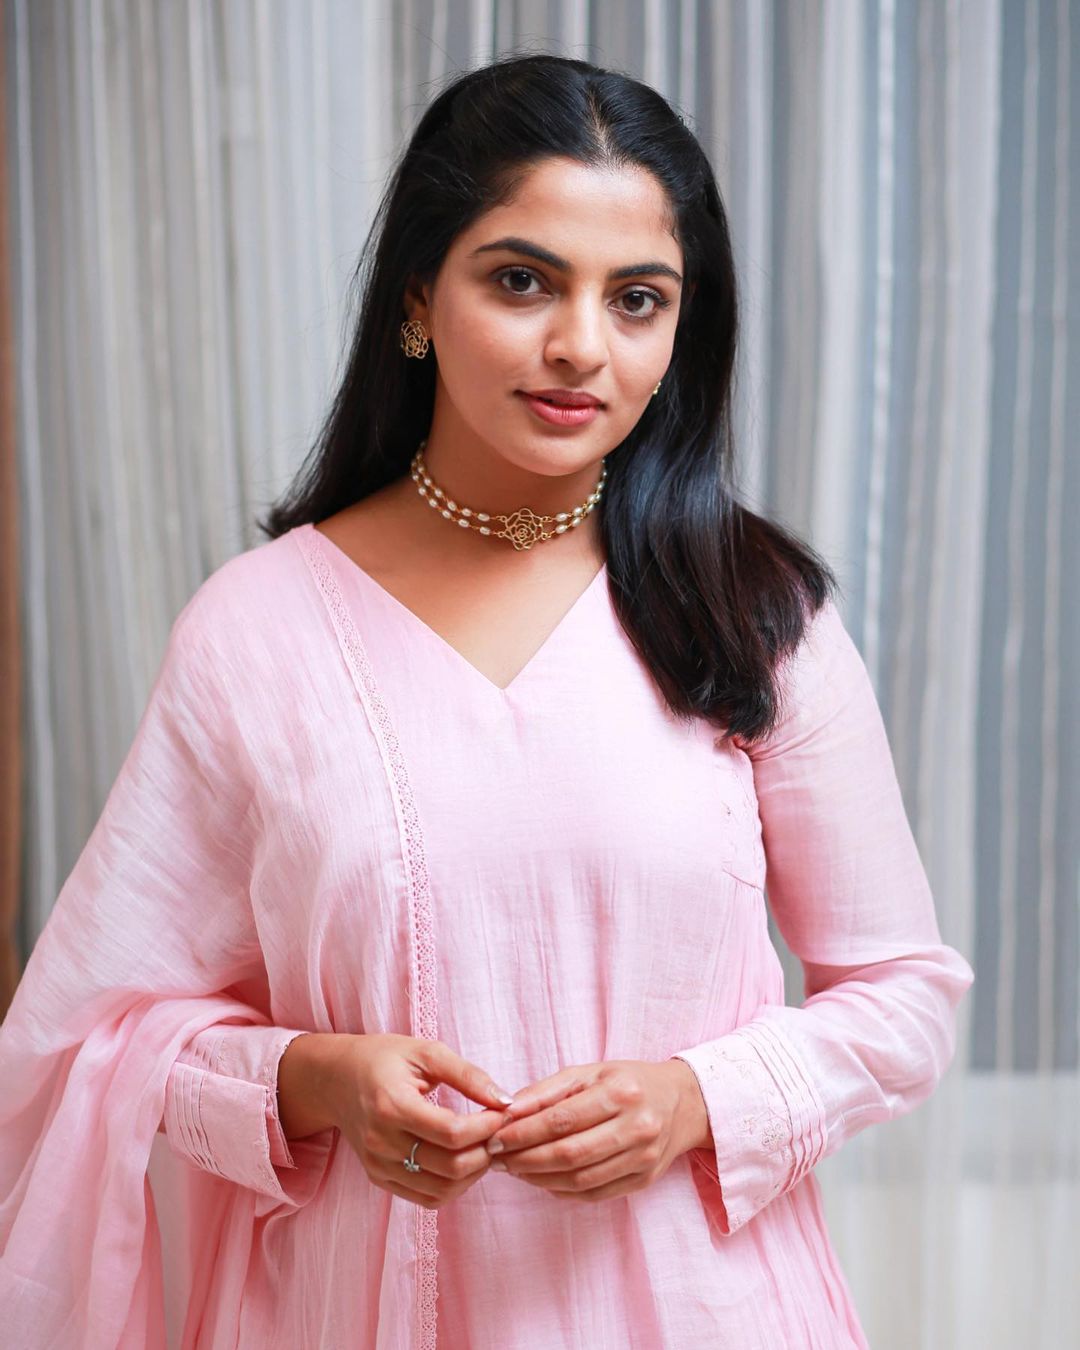 Young actress nikhila vimal looks stunningly beautiful in this pictures-Actressnikhila, Nikhila Vimal, Nikhilavimal Photos,Spicy Hot Pics,Images,High Resolution WallPapers Download